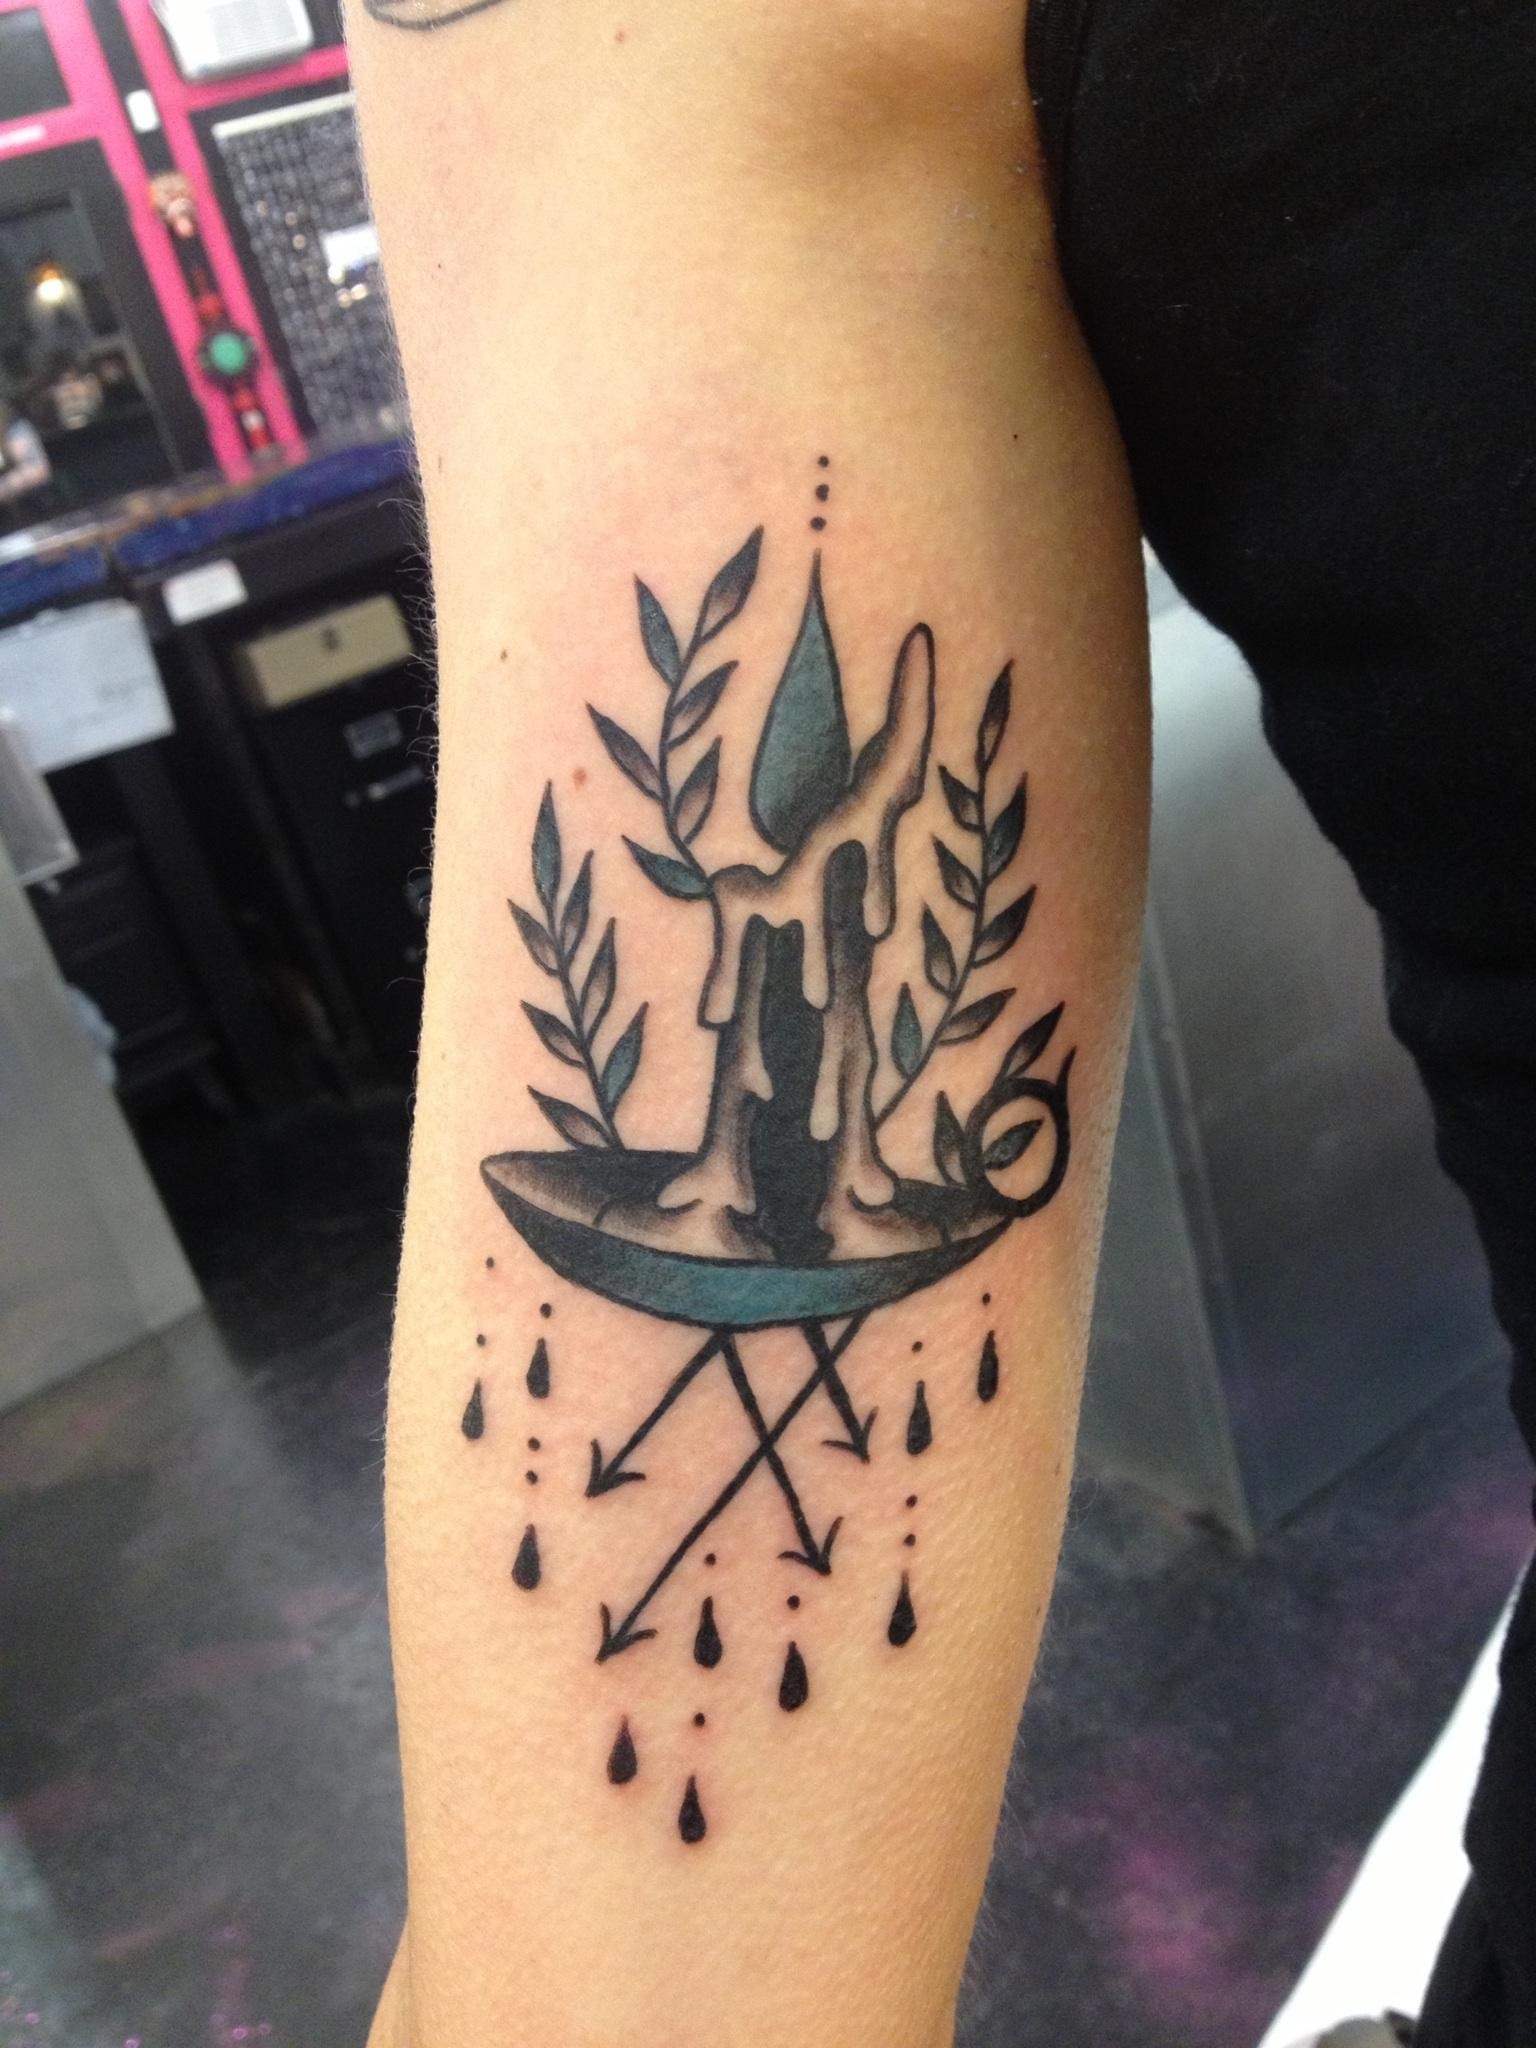 101 Best Candle Tattoo Ideas You'll Have To See To Believe!